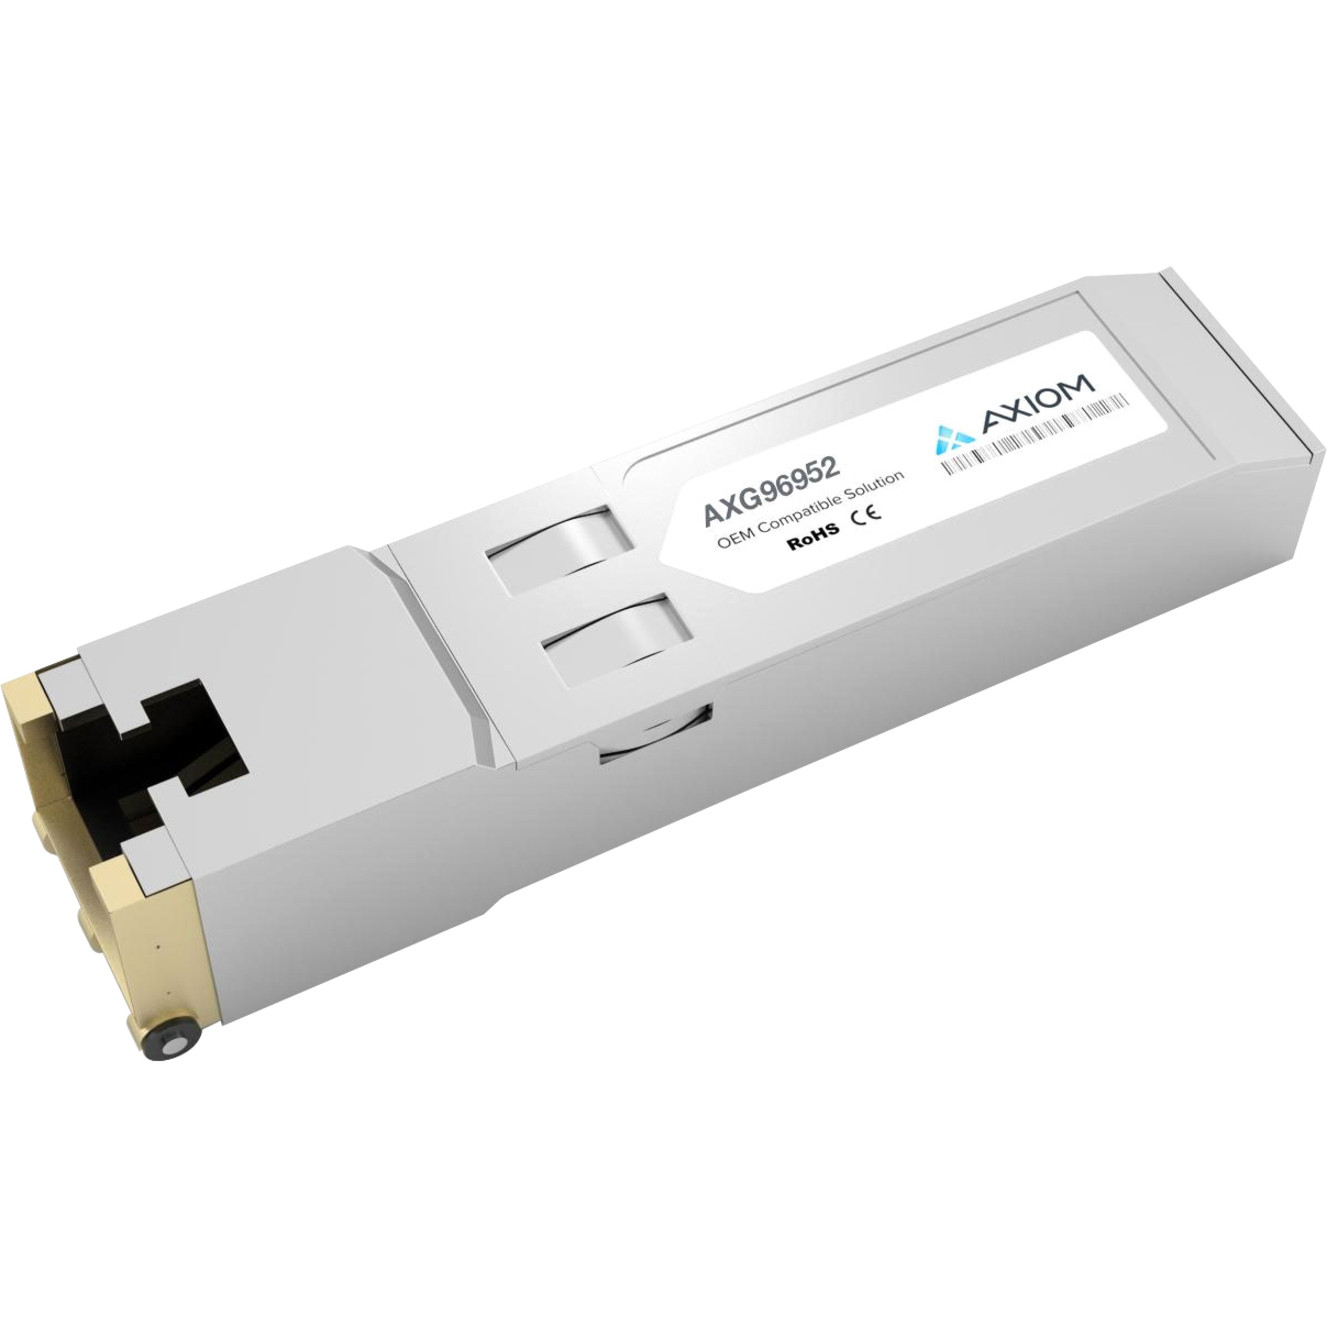 Axiom Memory Solutions 10GBASE-T SFP+ Transceiver for JuniperEX-SFP-10GE-TTAA Compliant100% Juniper Compatible 10GBASE-T SFP+ AXG96952